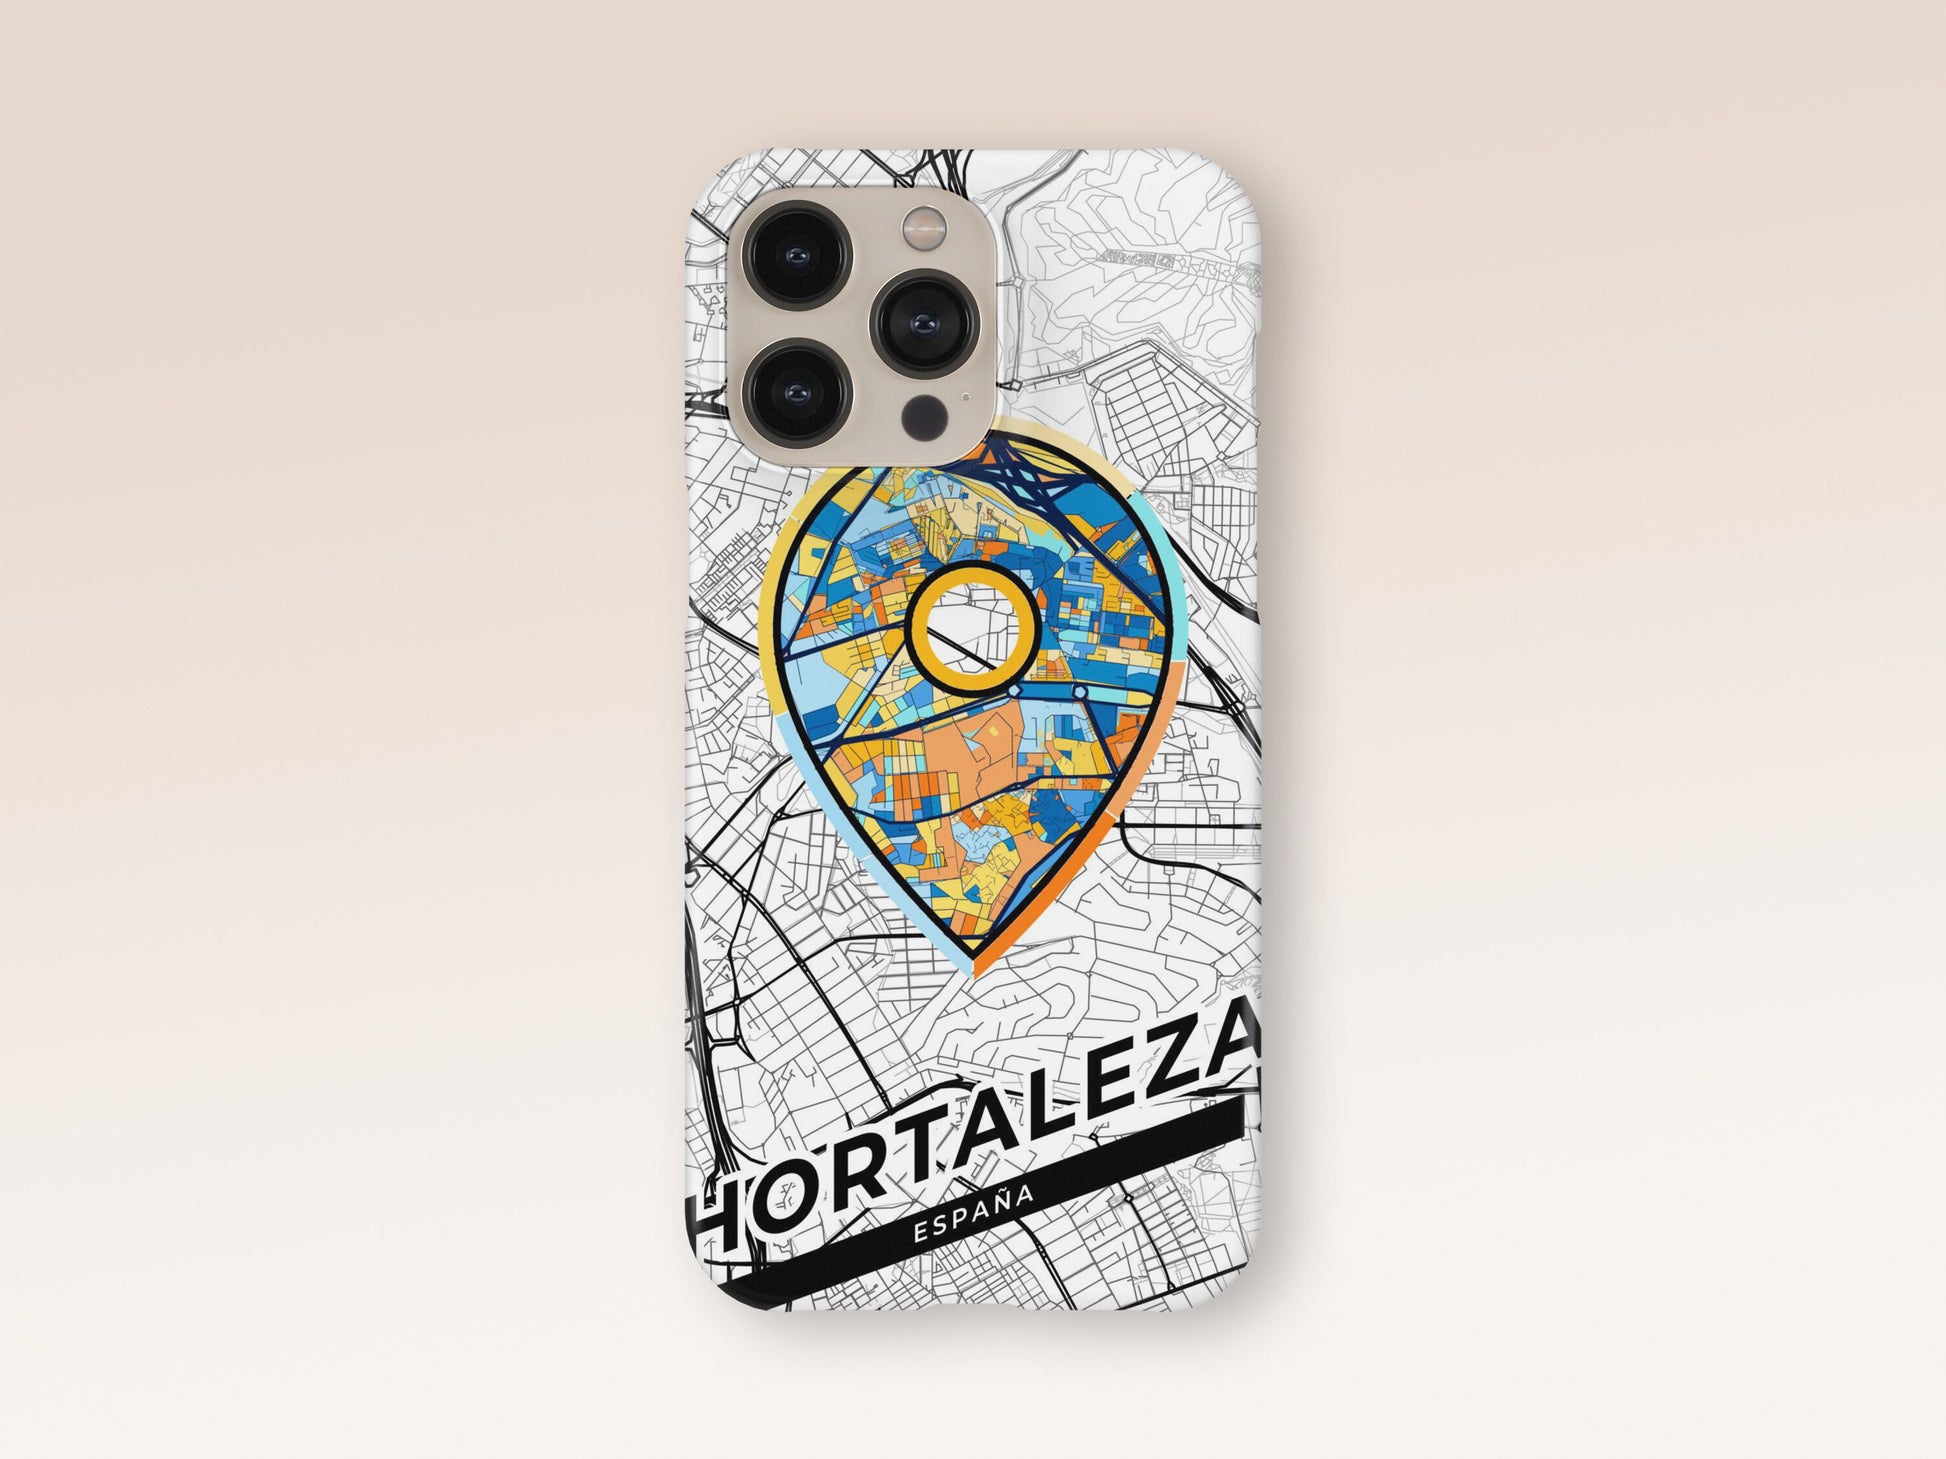 Hortaleza Spain slim phone case with colorful icon. Birthday, wedding or housewarming gift. Couple match cases. 1